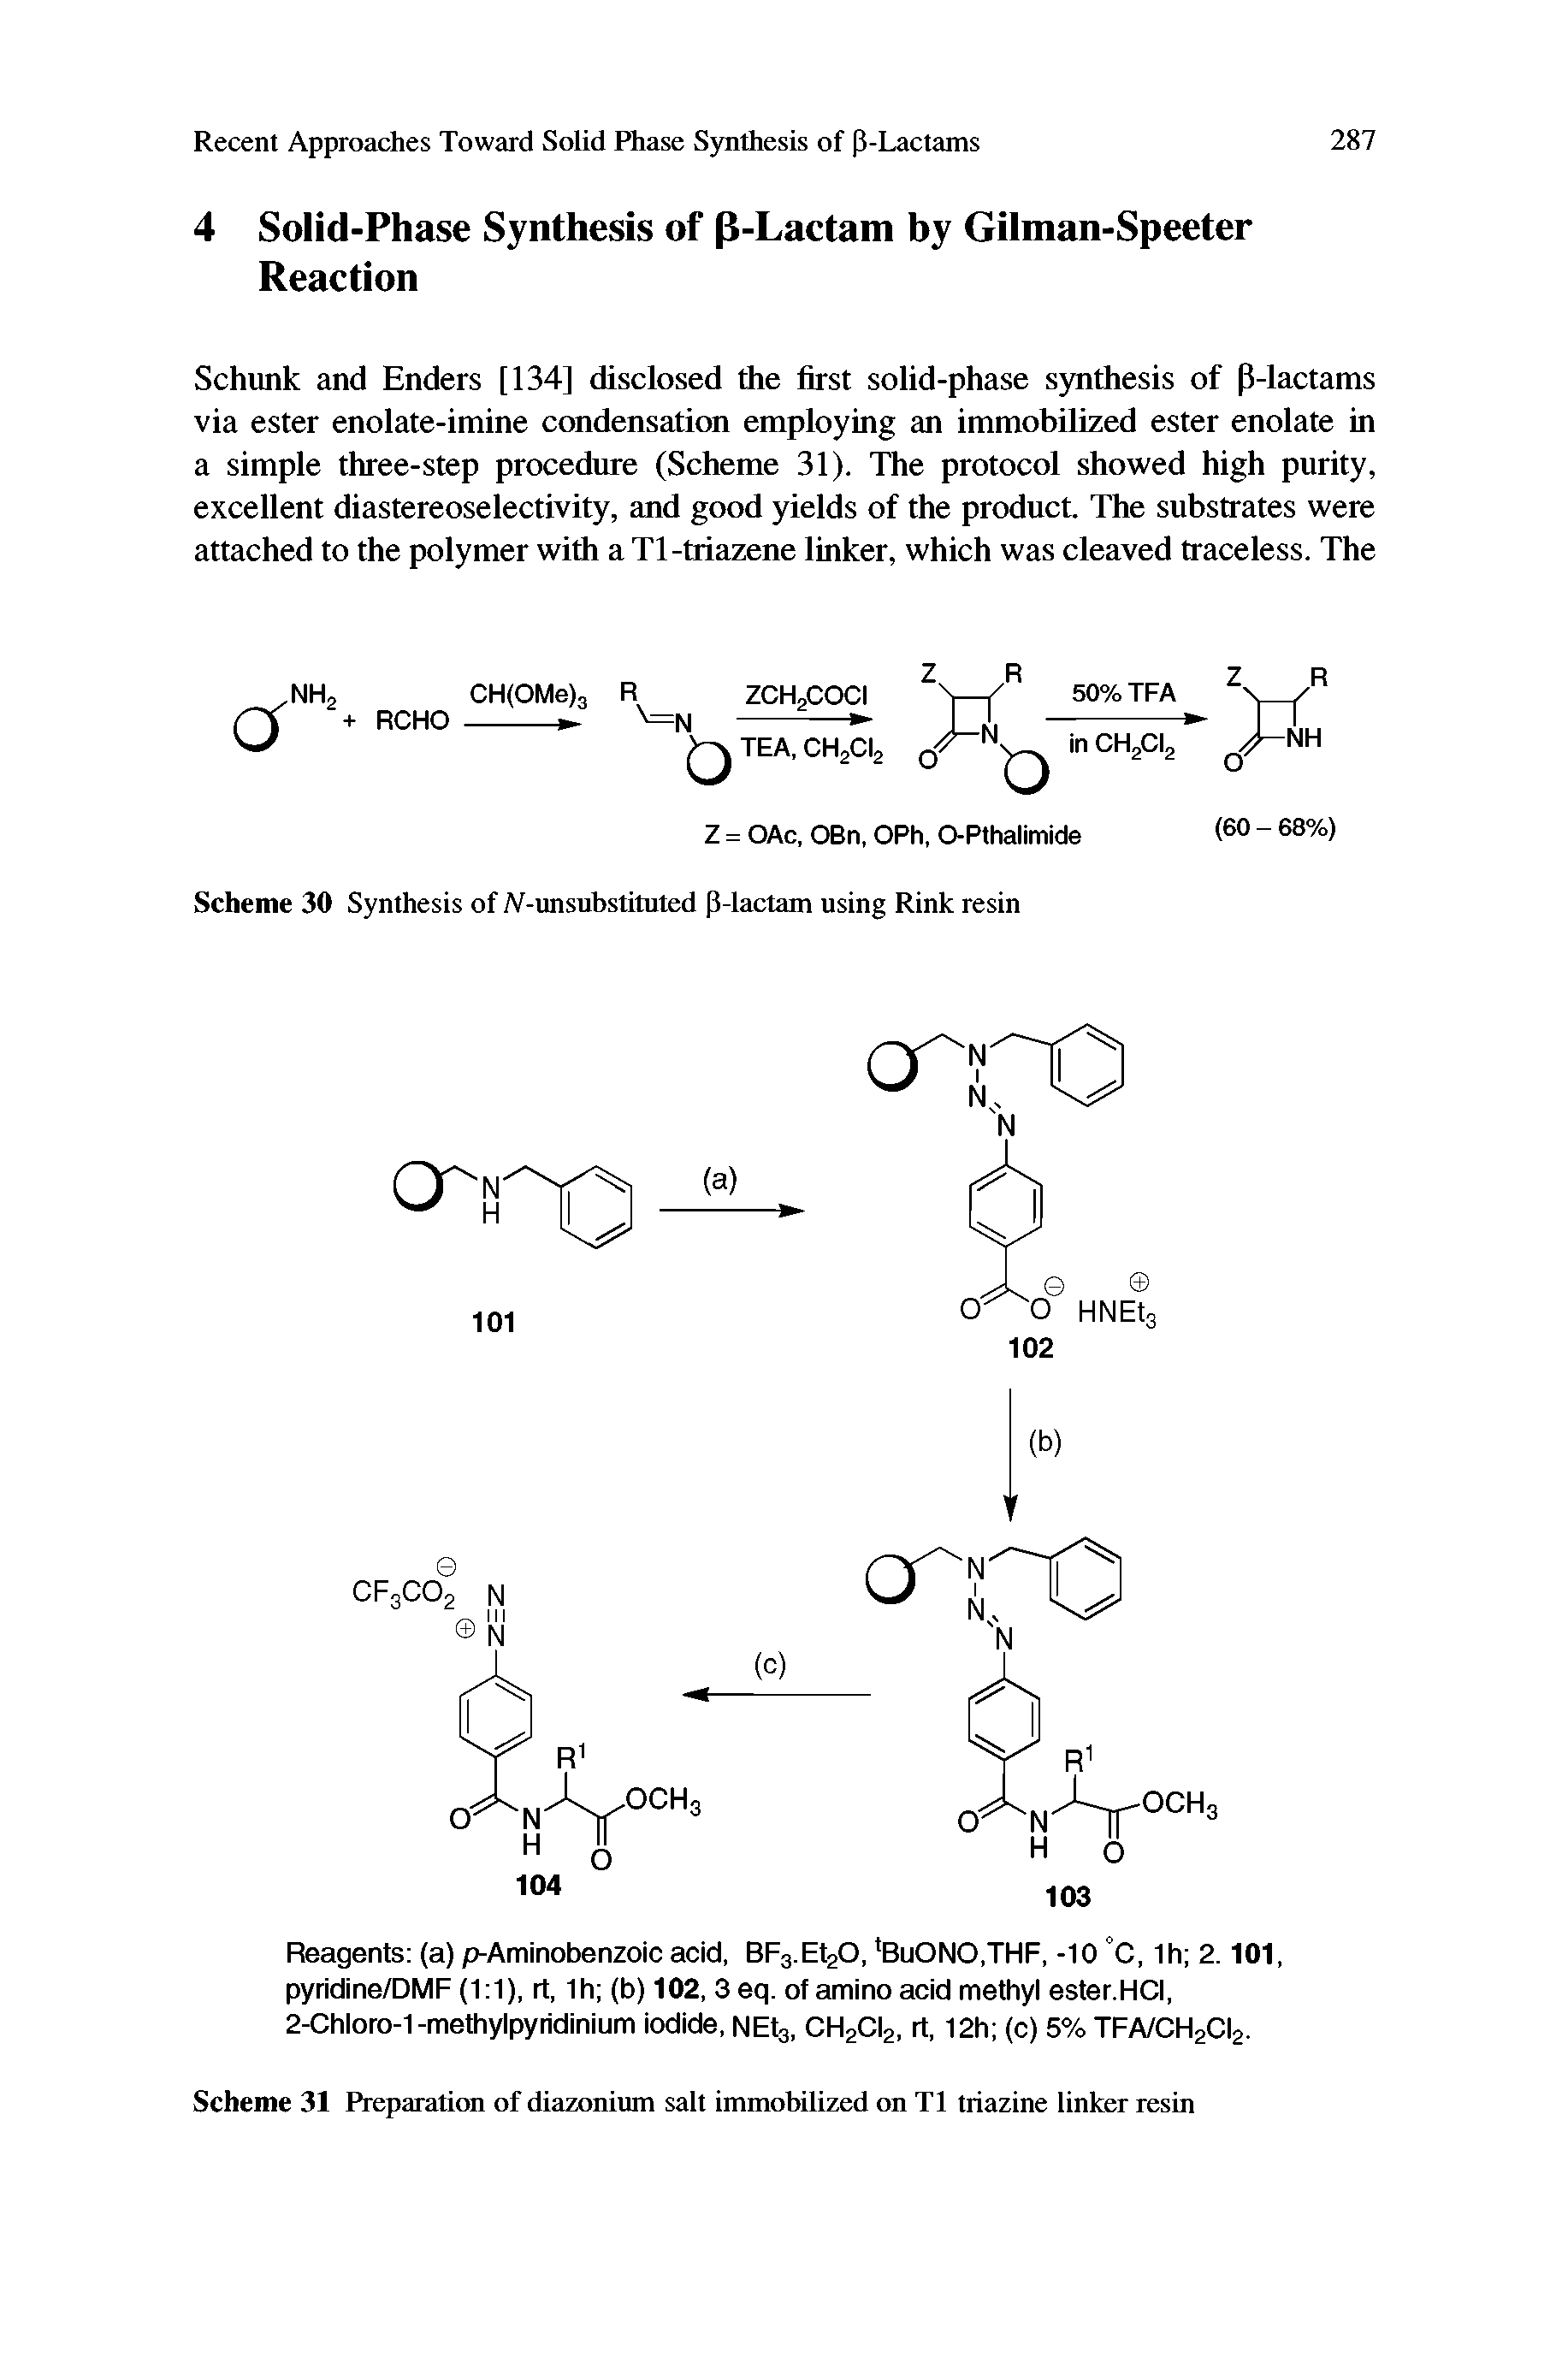 Scheme 30 Synthesis of iV-unsubstituted P-lactam using Rink resin...